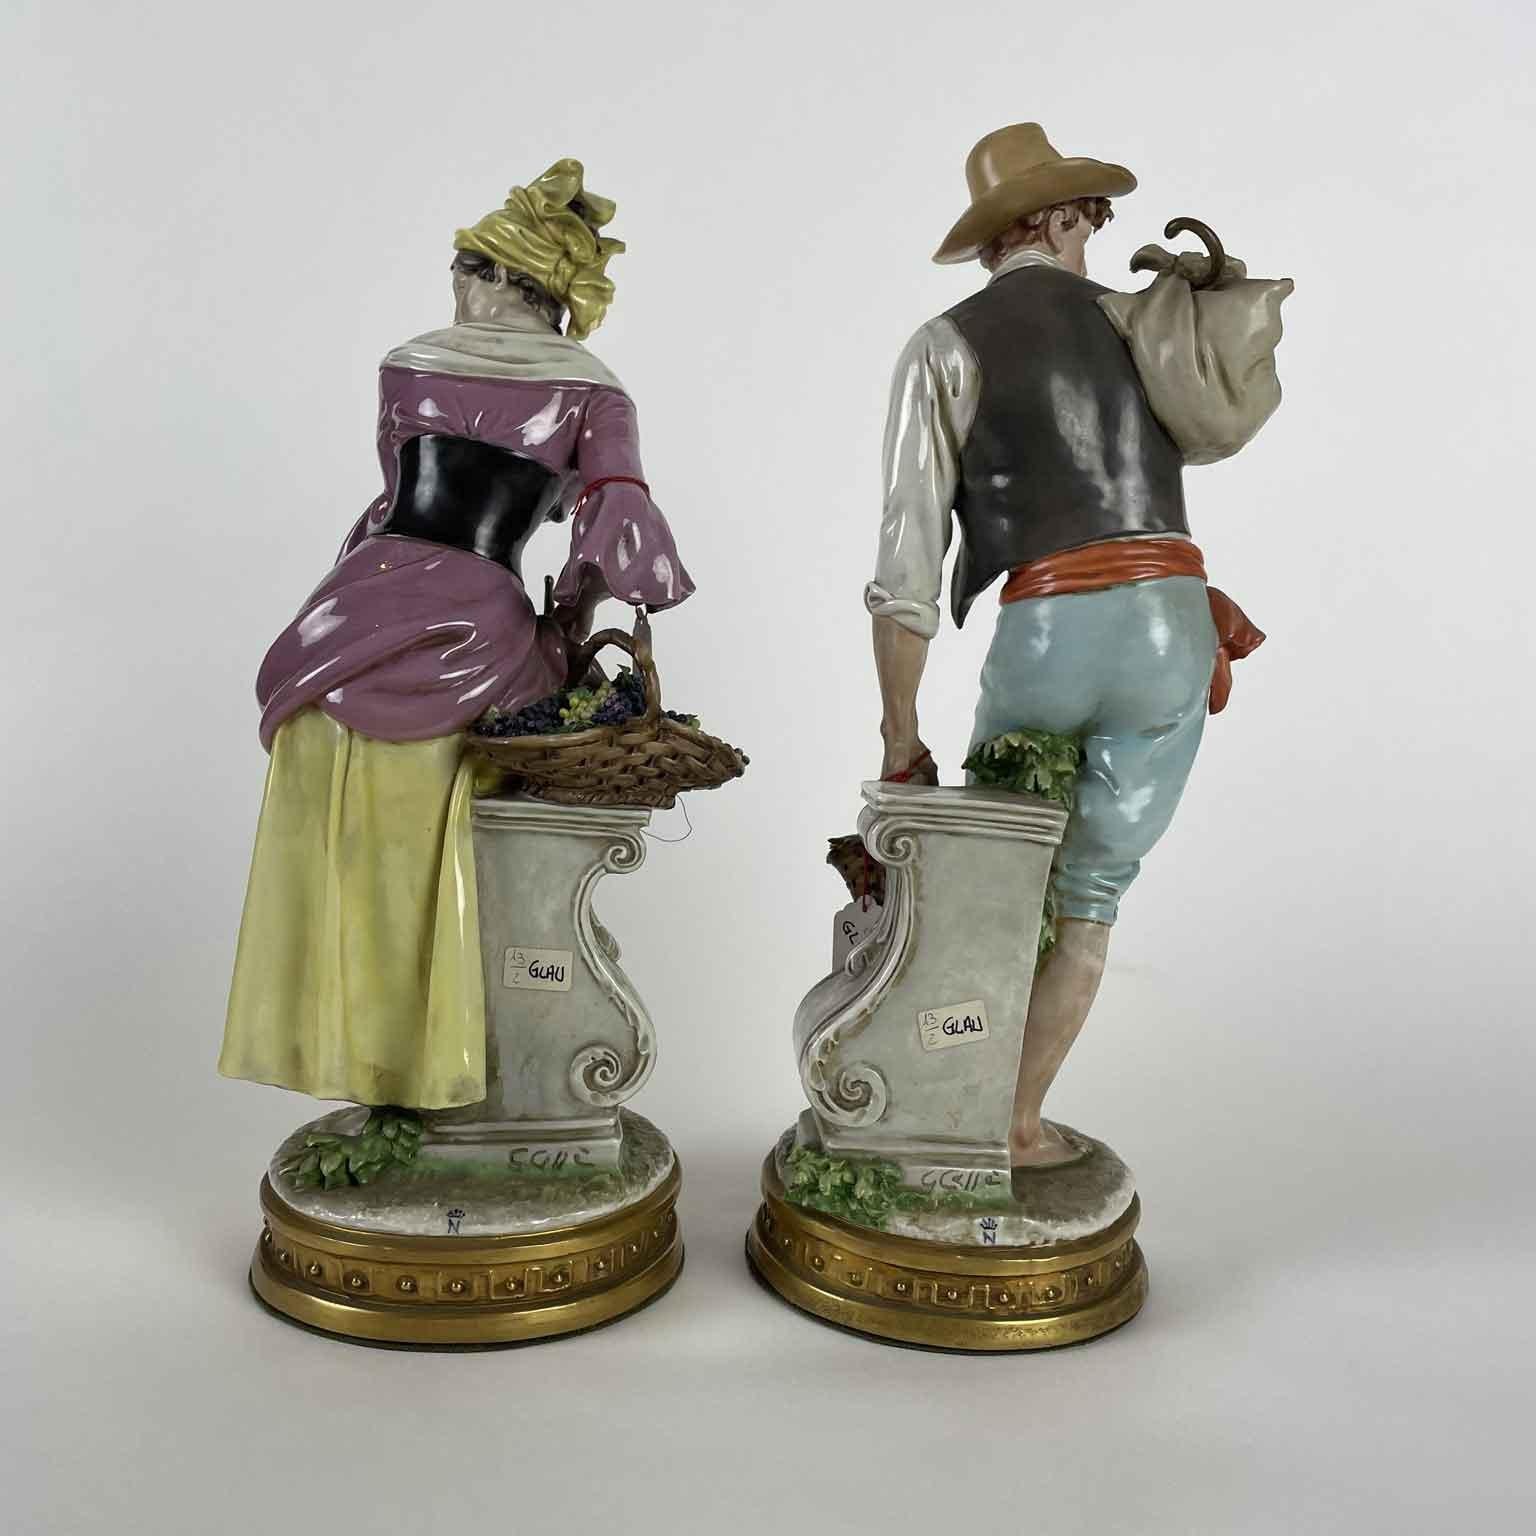 Neoclassical Revival Pair of Italian Peasant Figures Allegory of Abundance by Cappe Giuseppe, 1960s